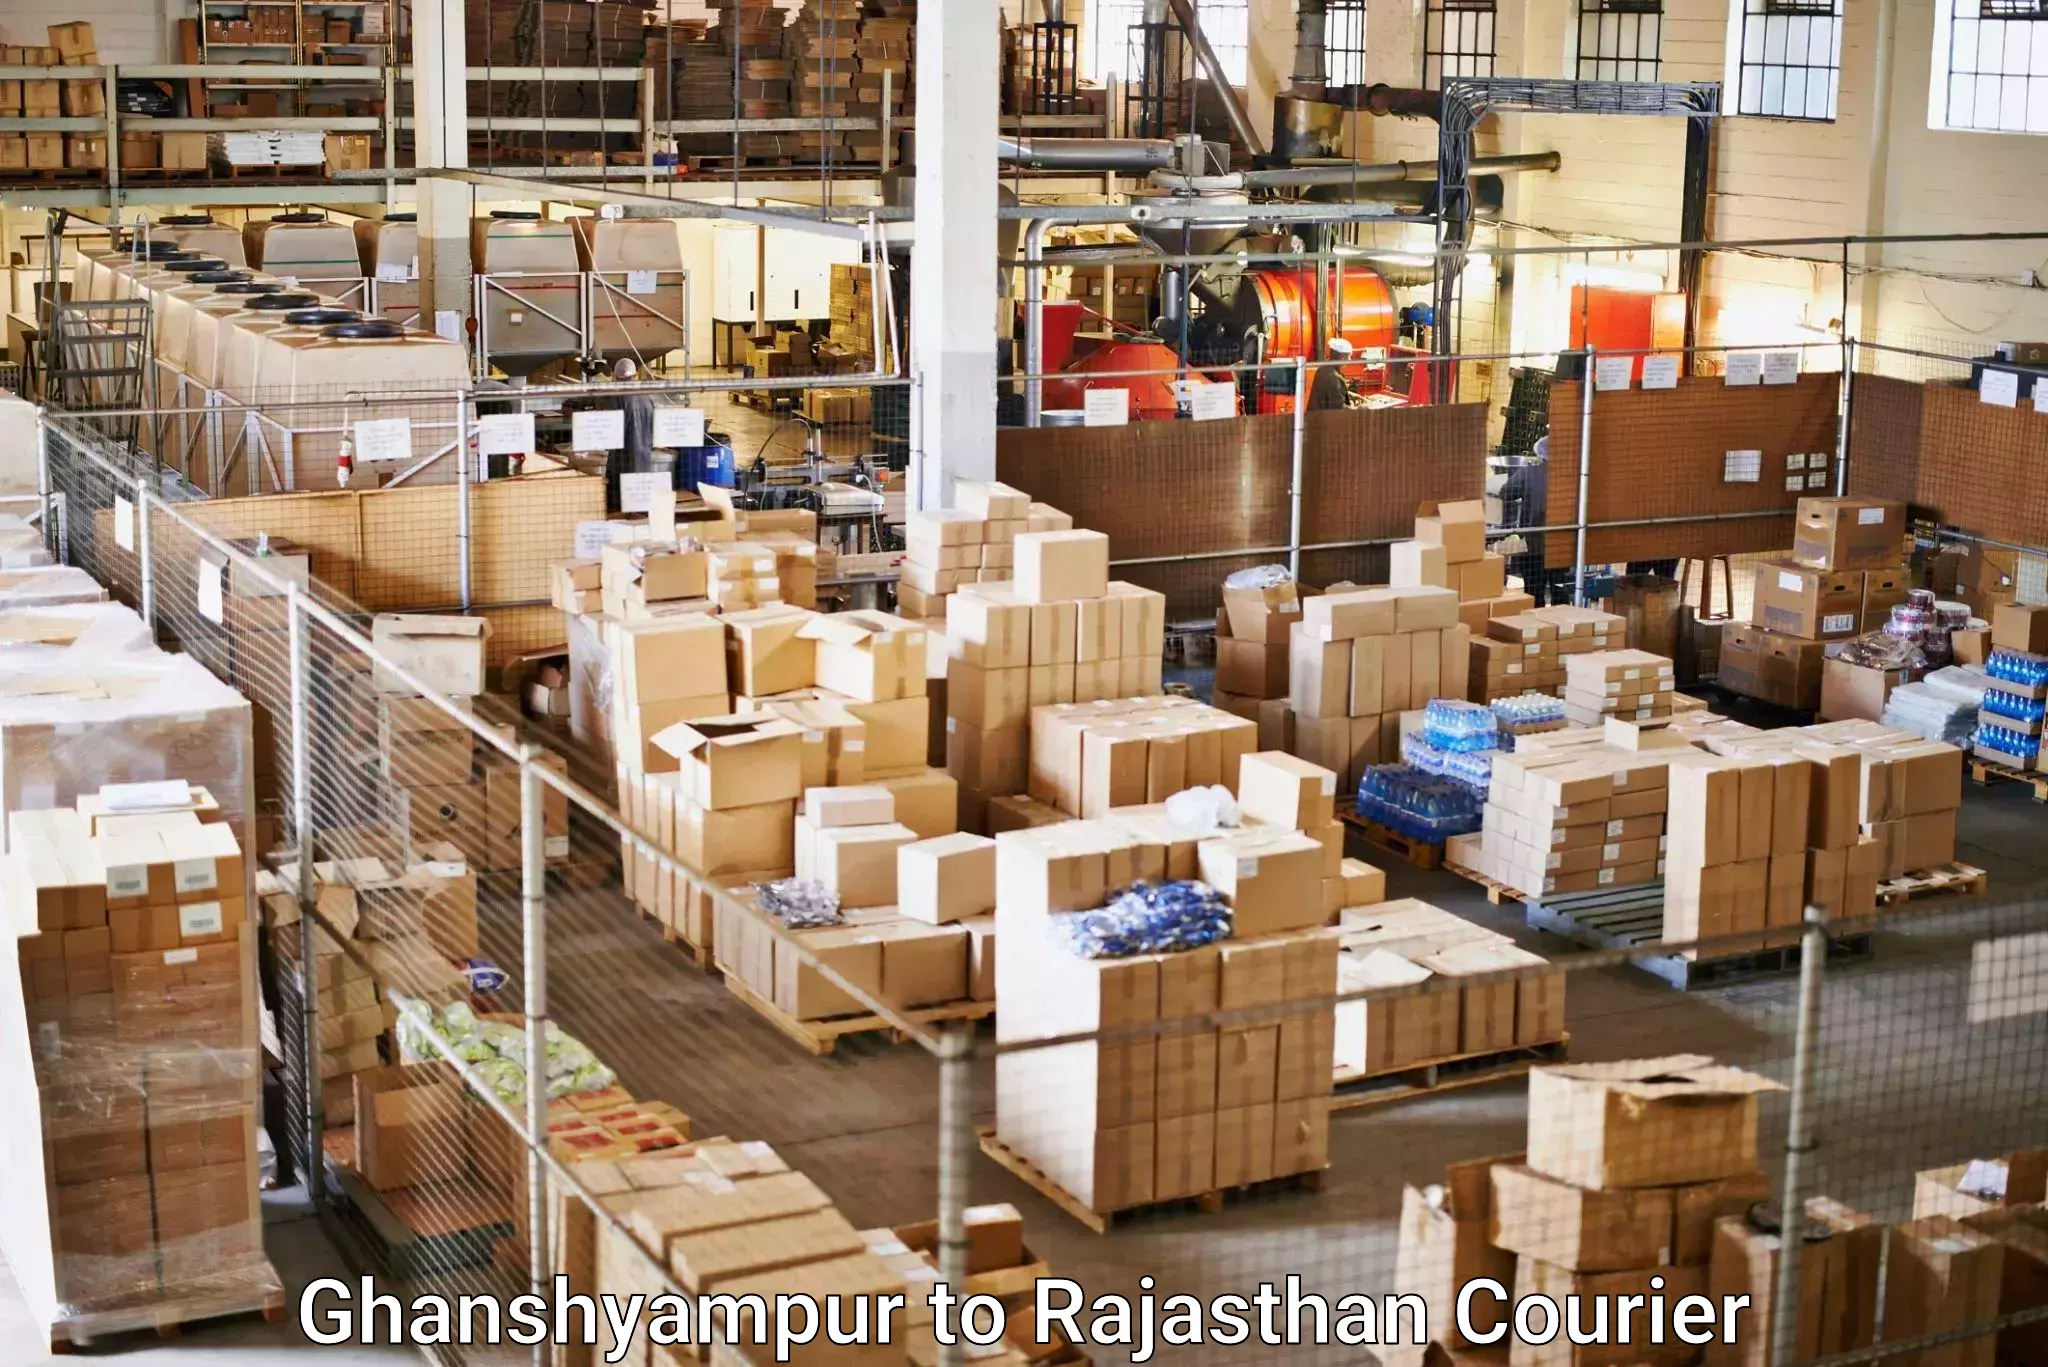 Advanced courier platforms in Ghanshyampur to Sikar